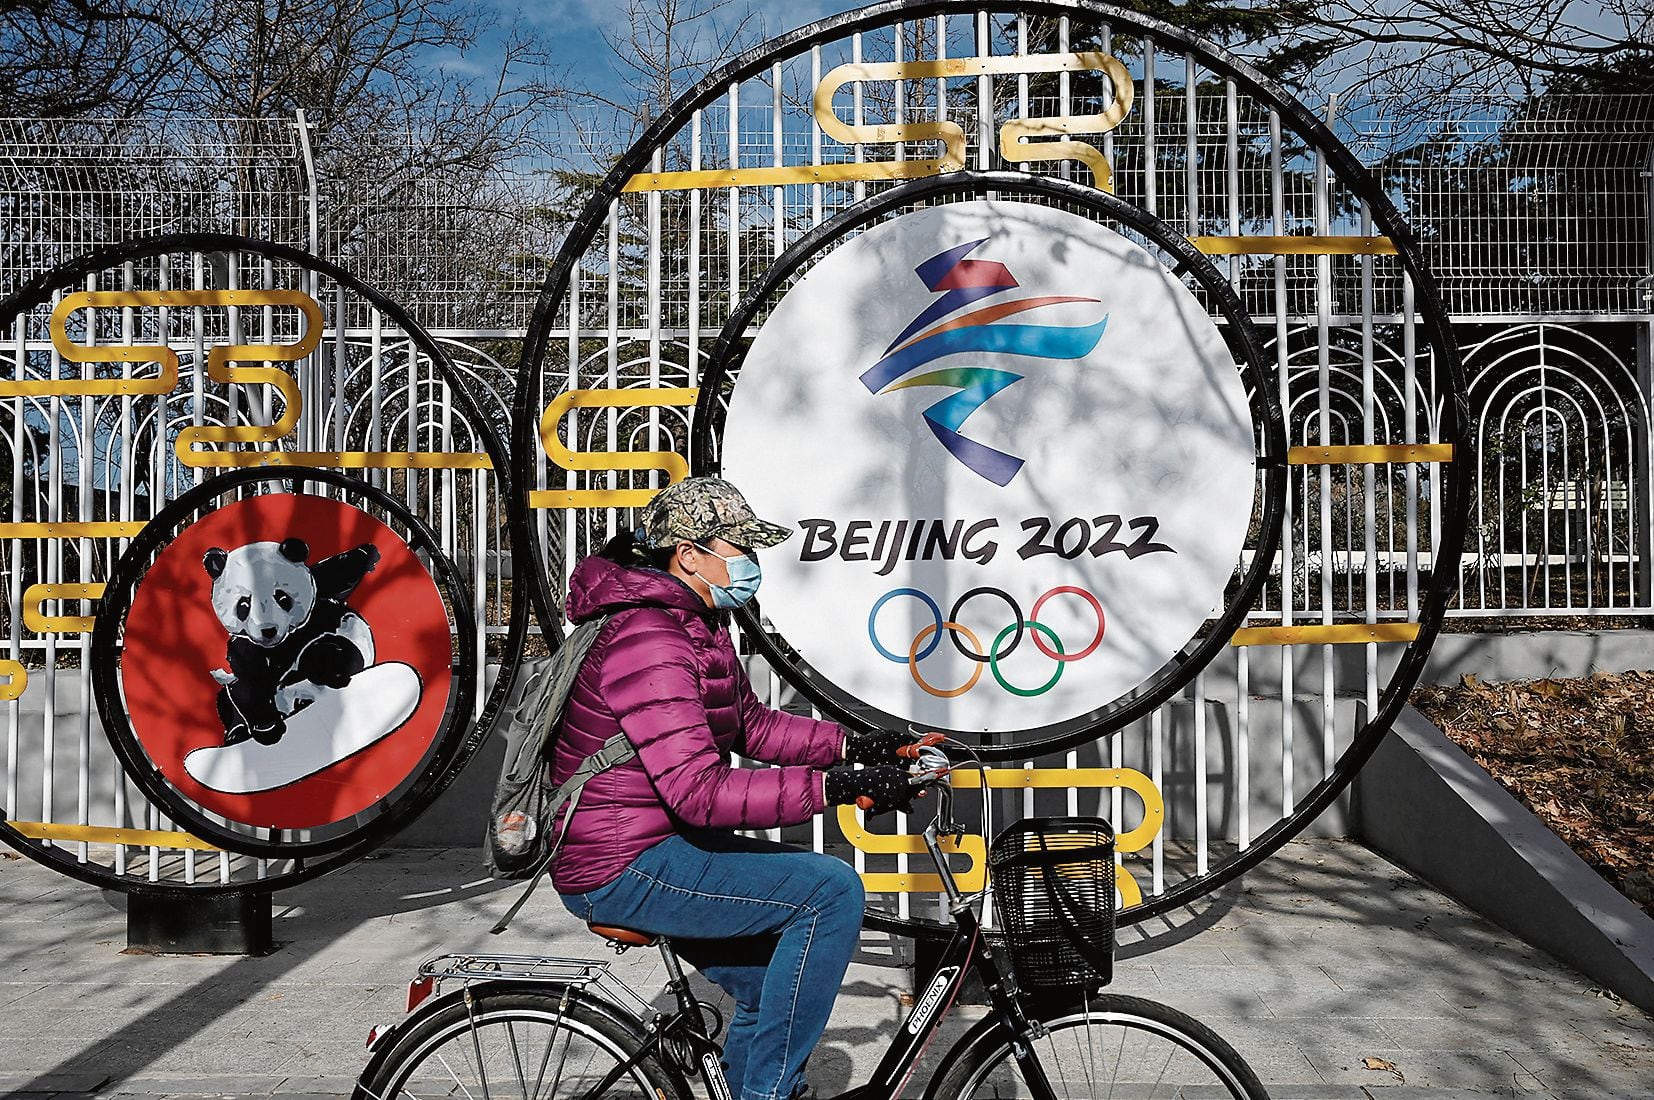 A woman rides past the Beijing 2022 Winter Olympic Games logo on a street in Beijing on December 11, 2021. (Photo by JADE GAO / AFP)